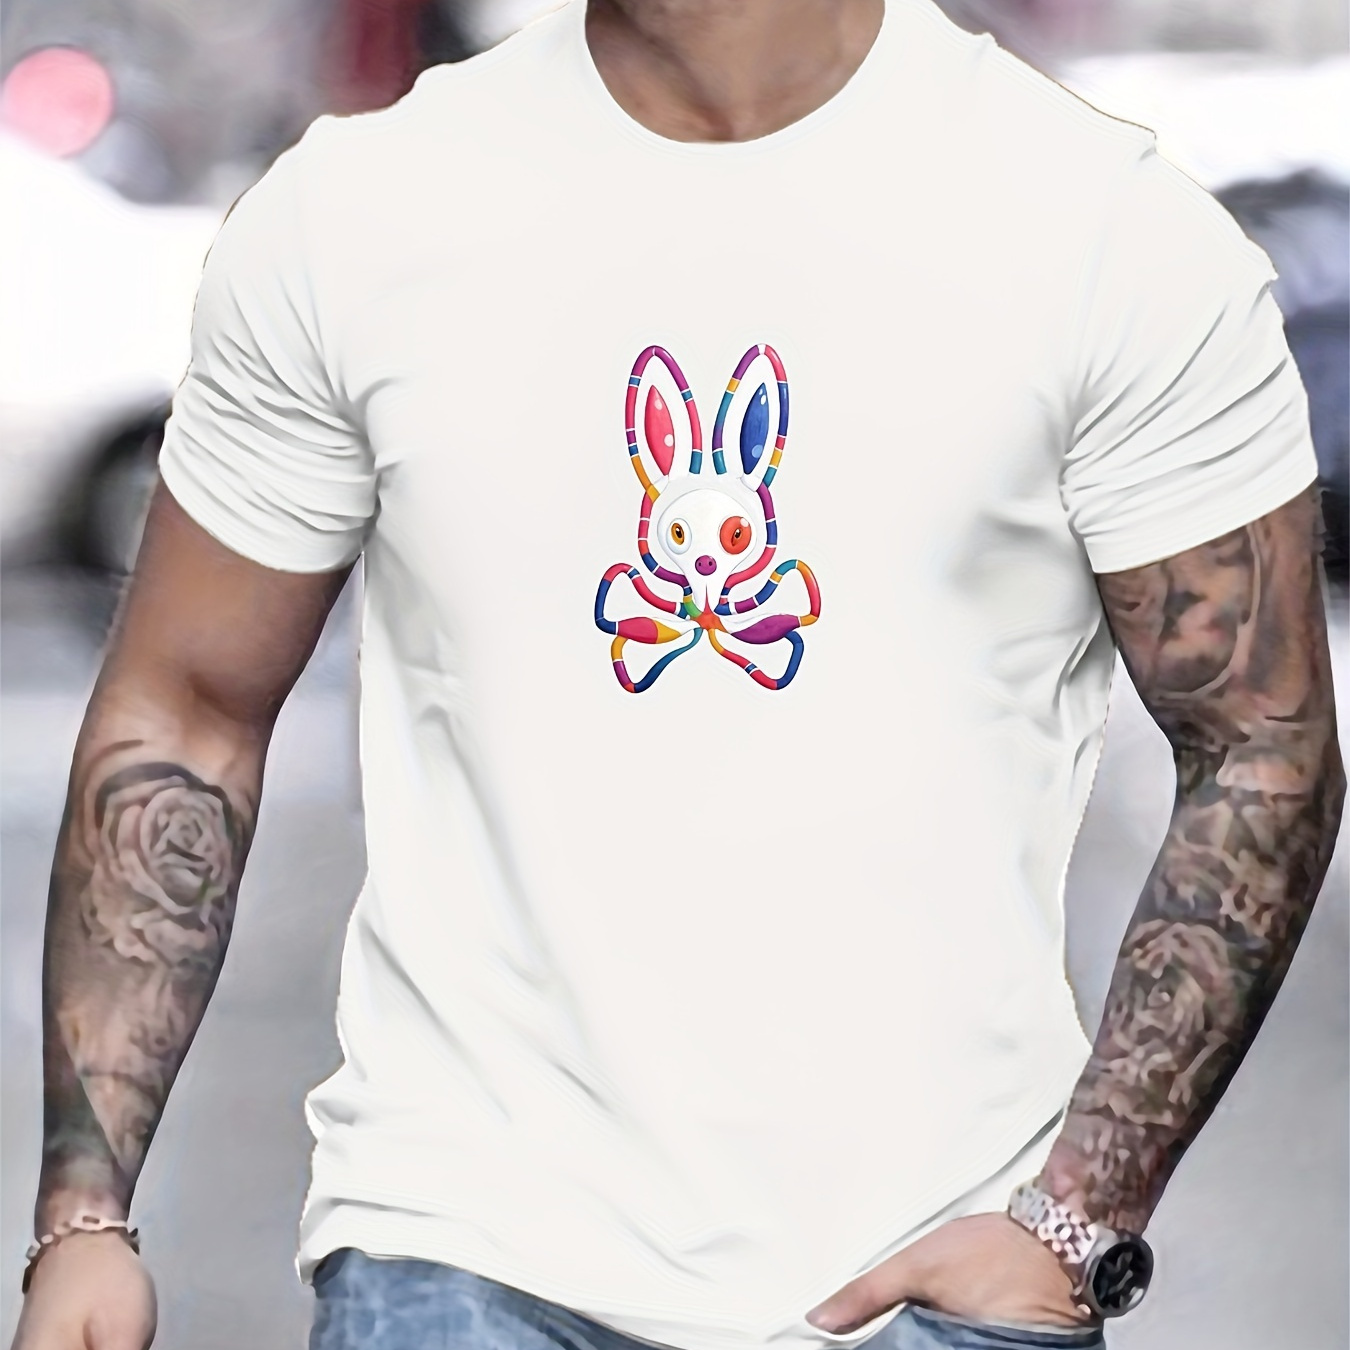 

Colored Rabbits Skeletons Print Cotton T-shirt For Men, Comfortable & Stretchable, Summer Outdoor Activity, Streetwear Style, Crew Neck Top, Casual Pattern Tee For Gift, Summer Apparel Casual Fit